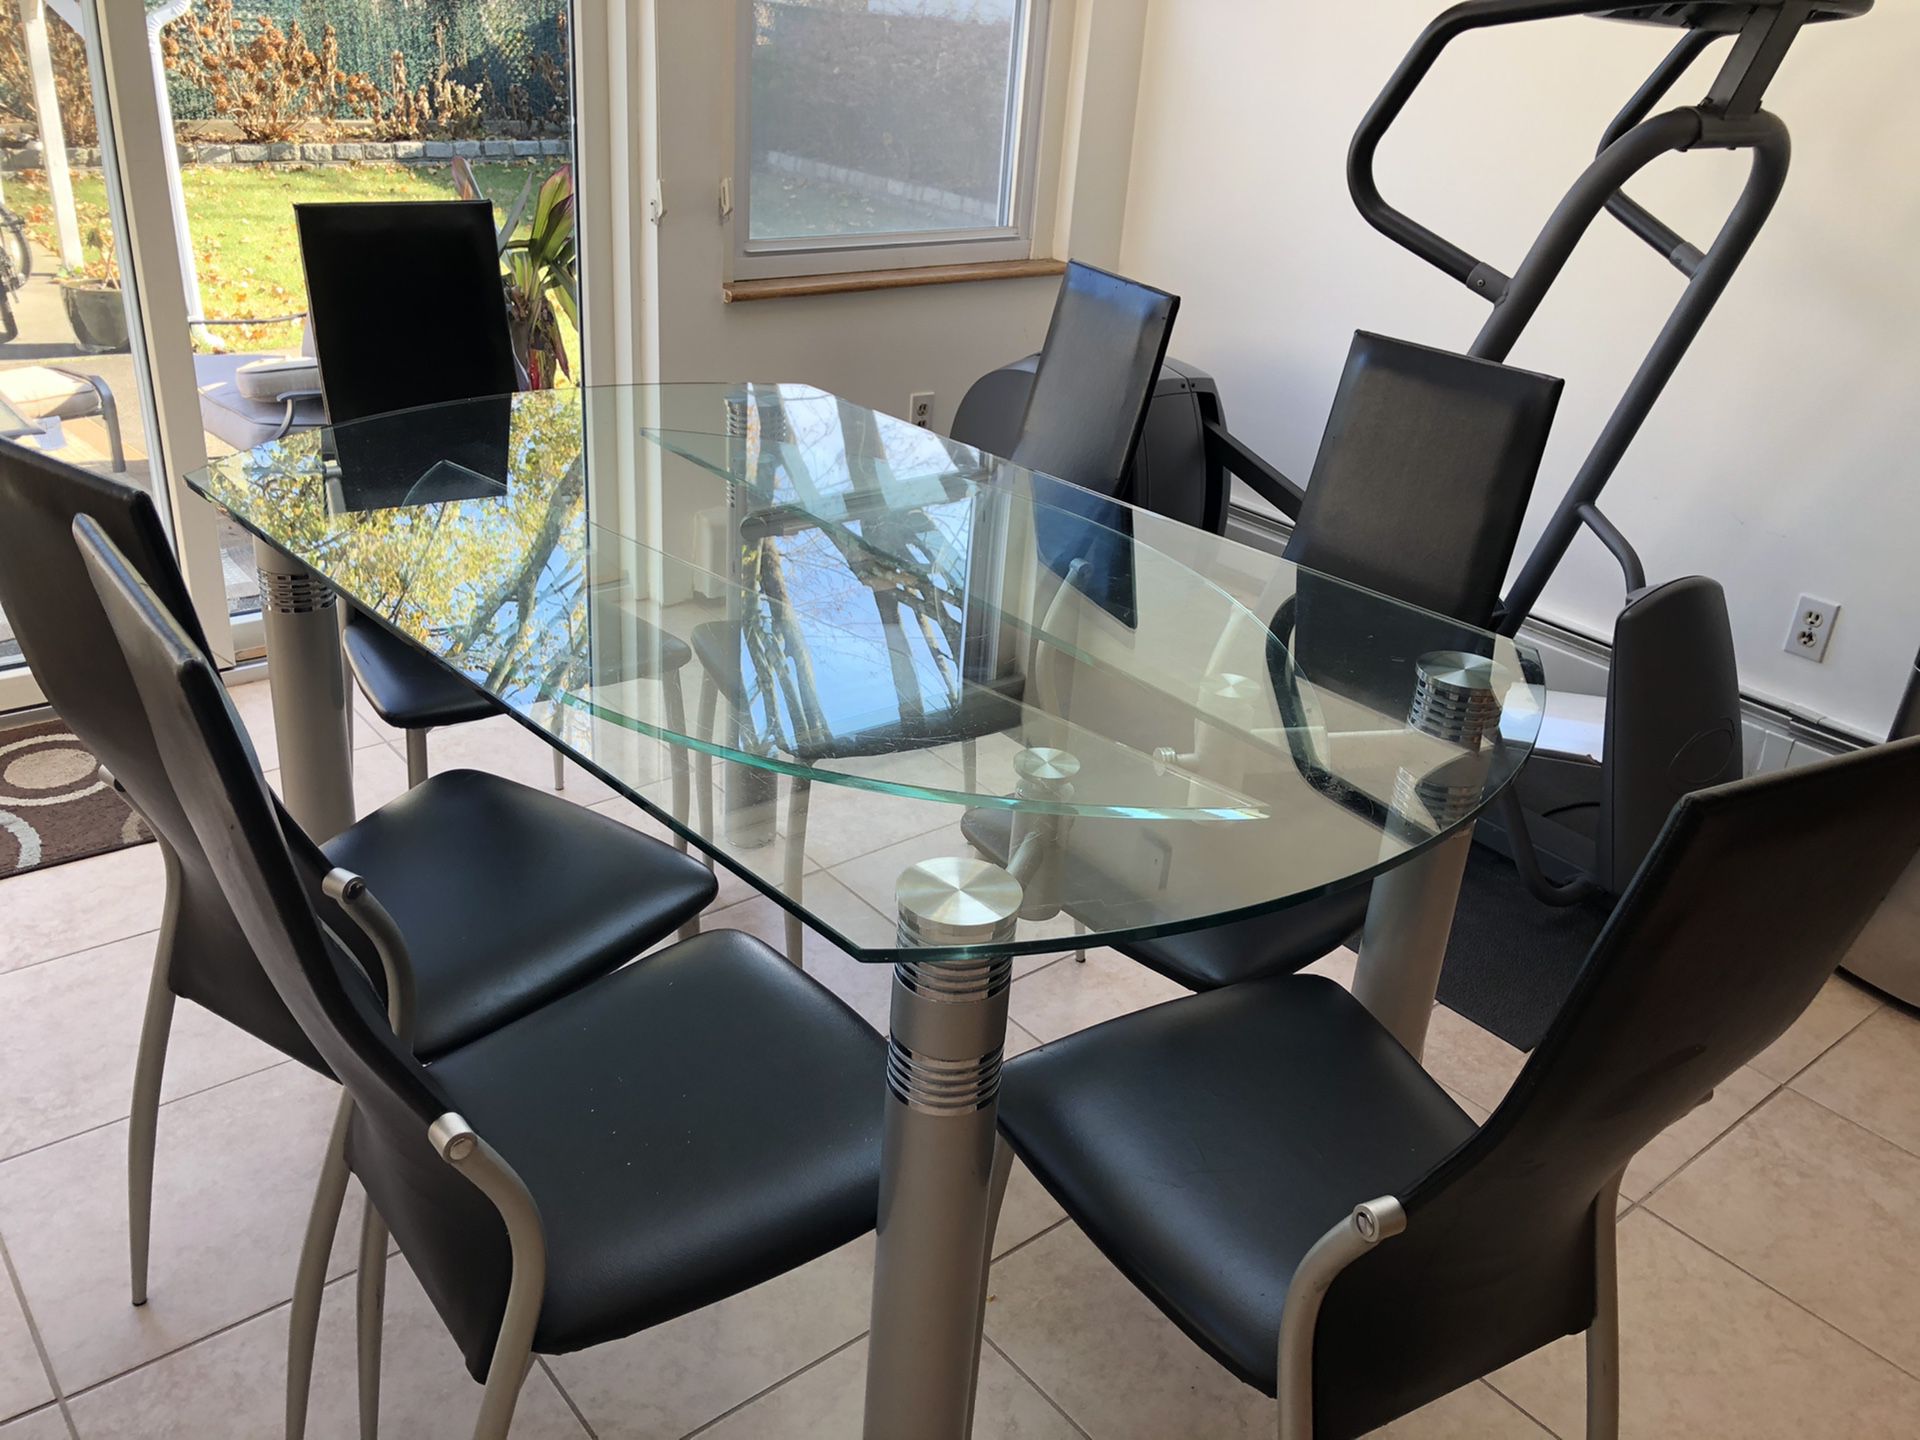 Kitchen dining table with 6 chairs and lazy susan. Cash only